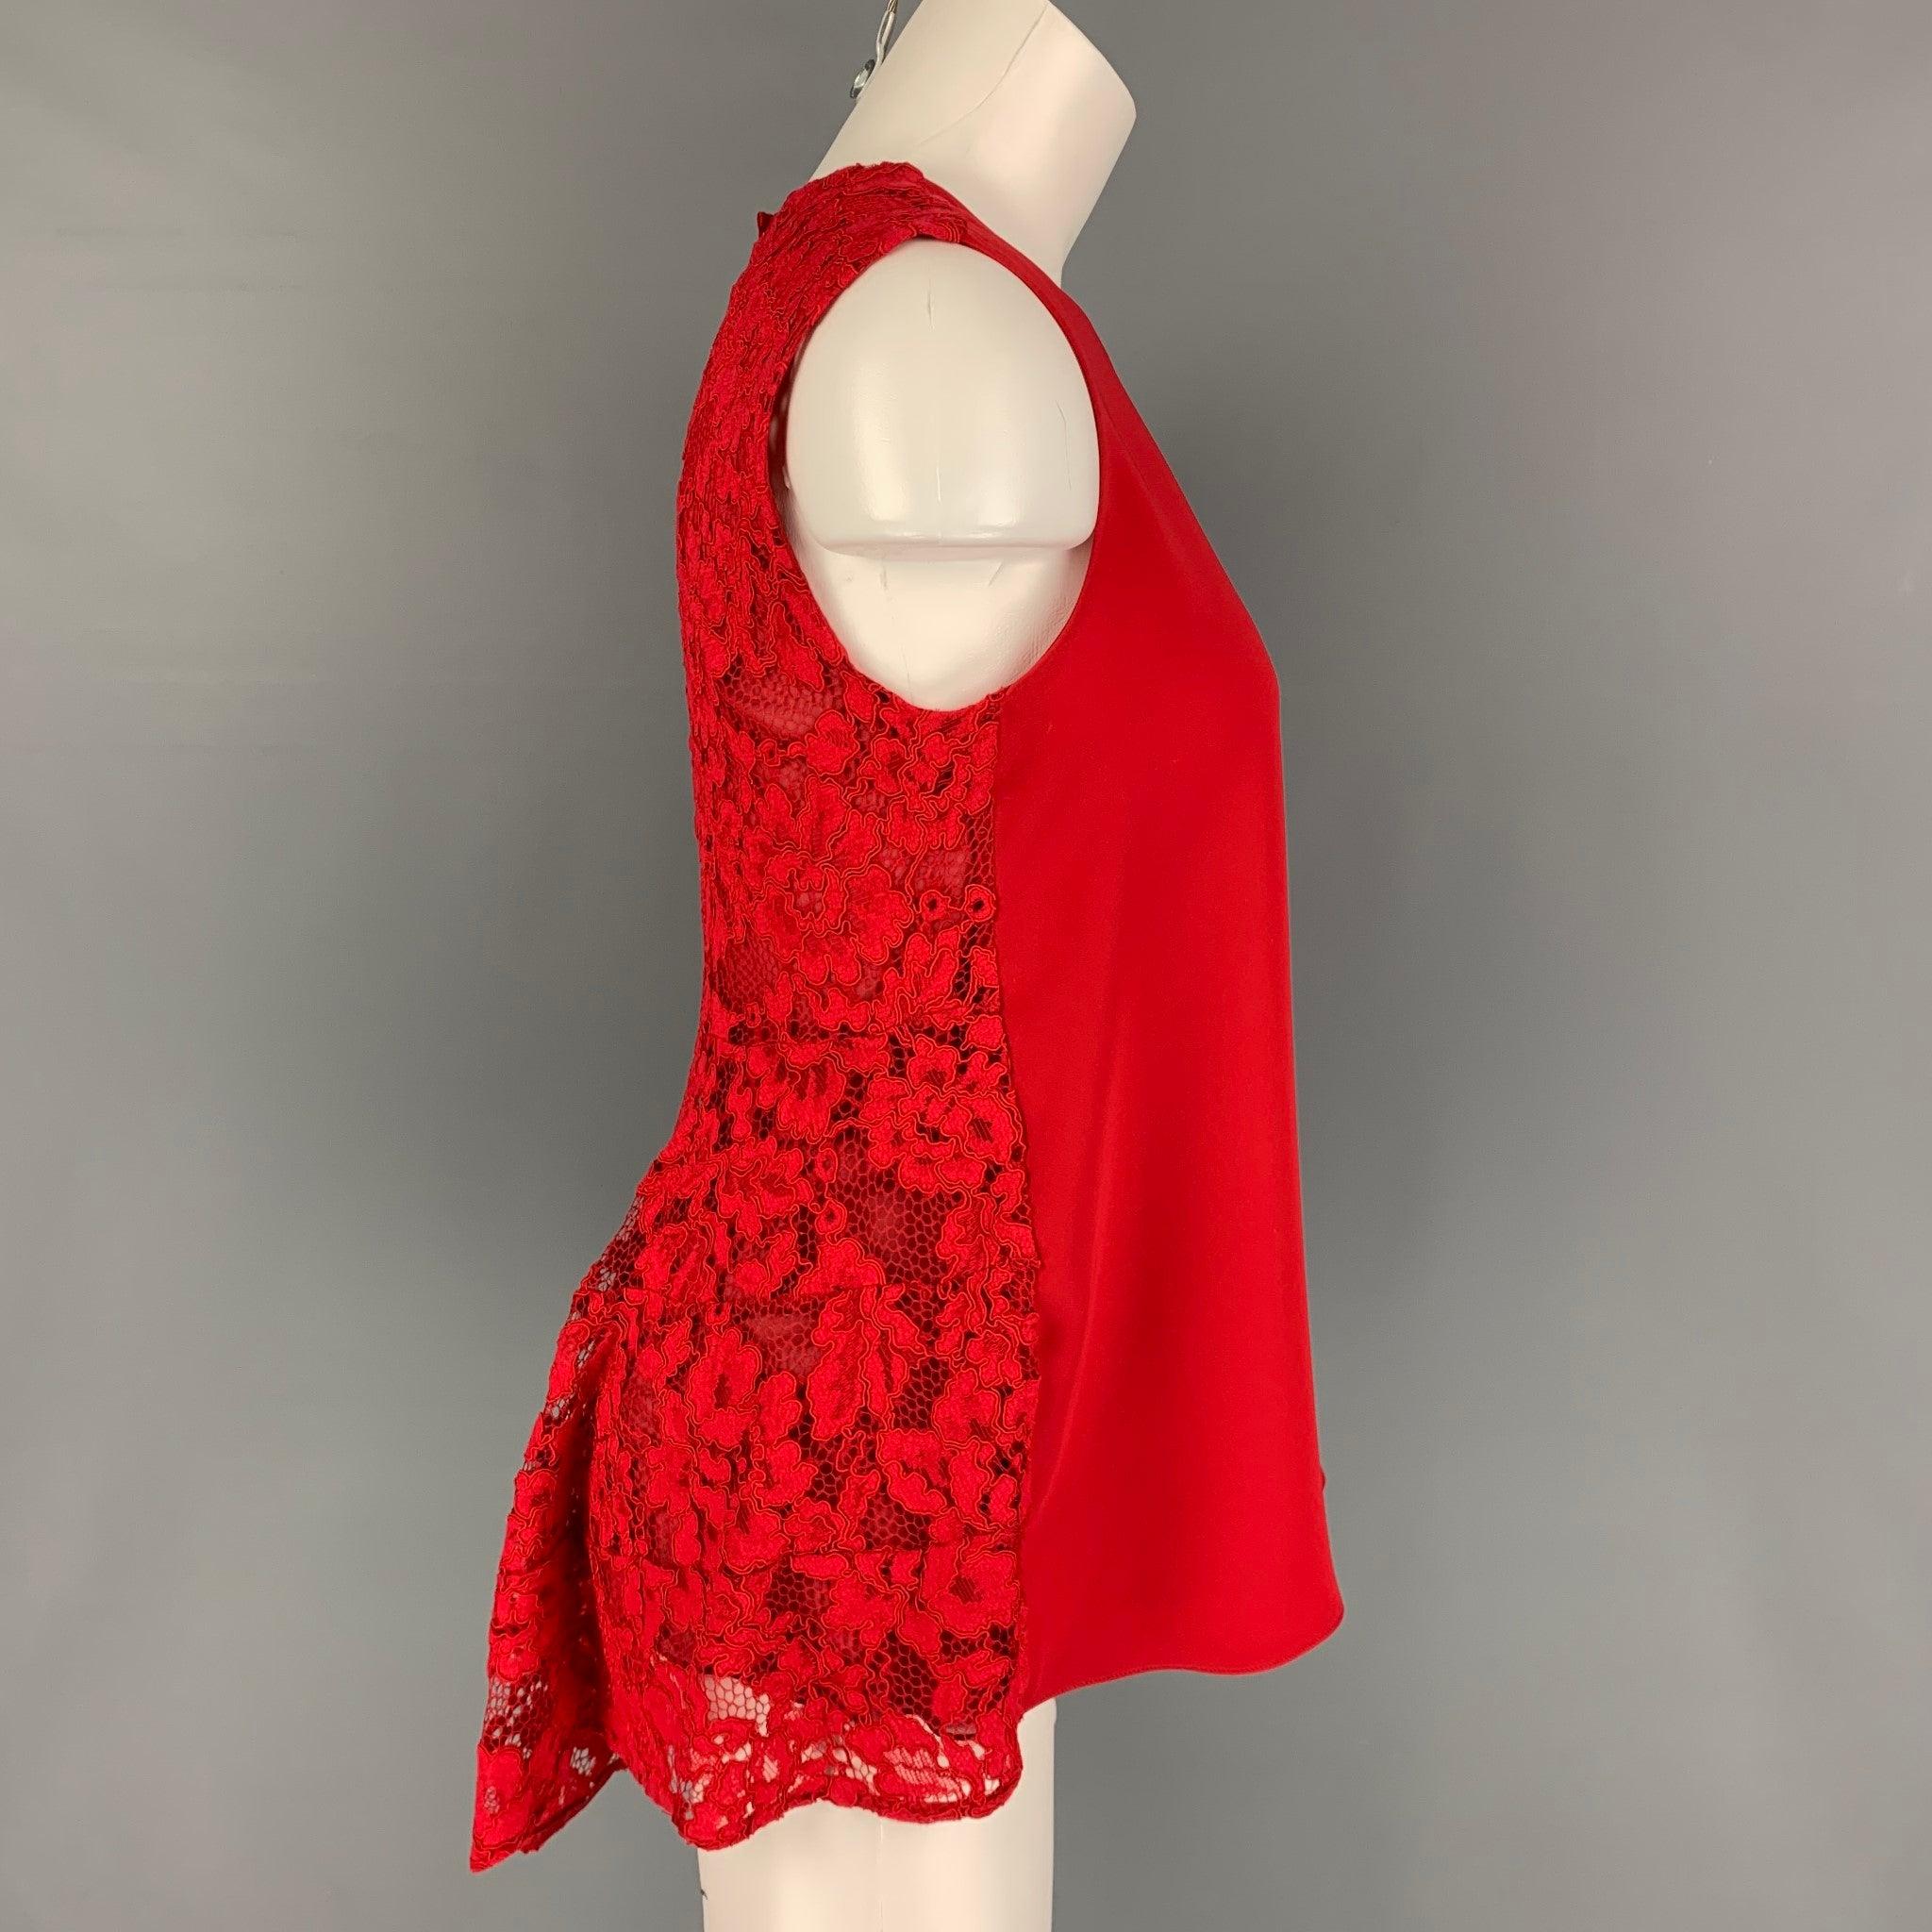 CAROLINA HERRERA blouse comes in a red polyester blend featuring a peplum style, back lace panel, and a single button closure.
Very Good
Pre-Owned Condition. 

Marked:   2 

Measurements: 
 
Shoulder: 14.5 inches  Bust: 32 inches  Length: 28 inches